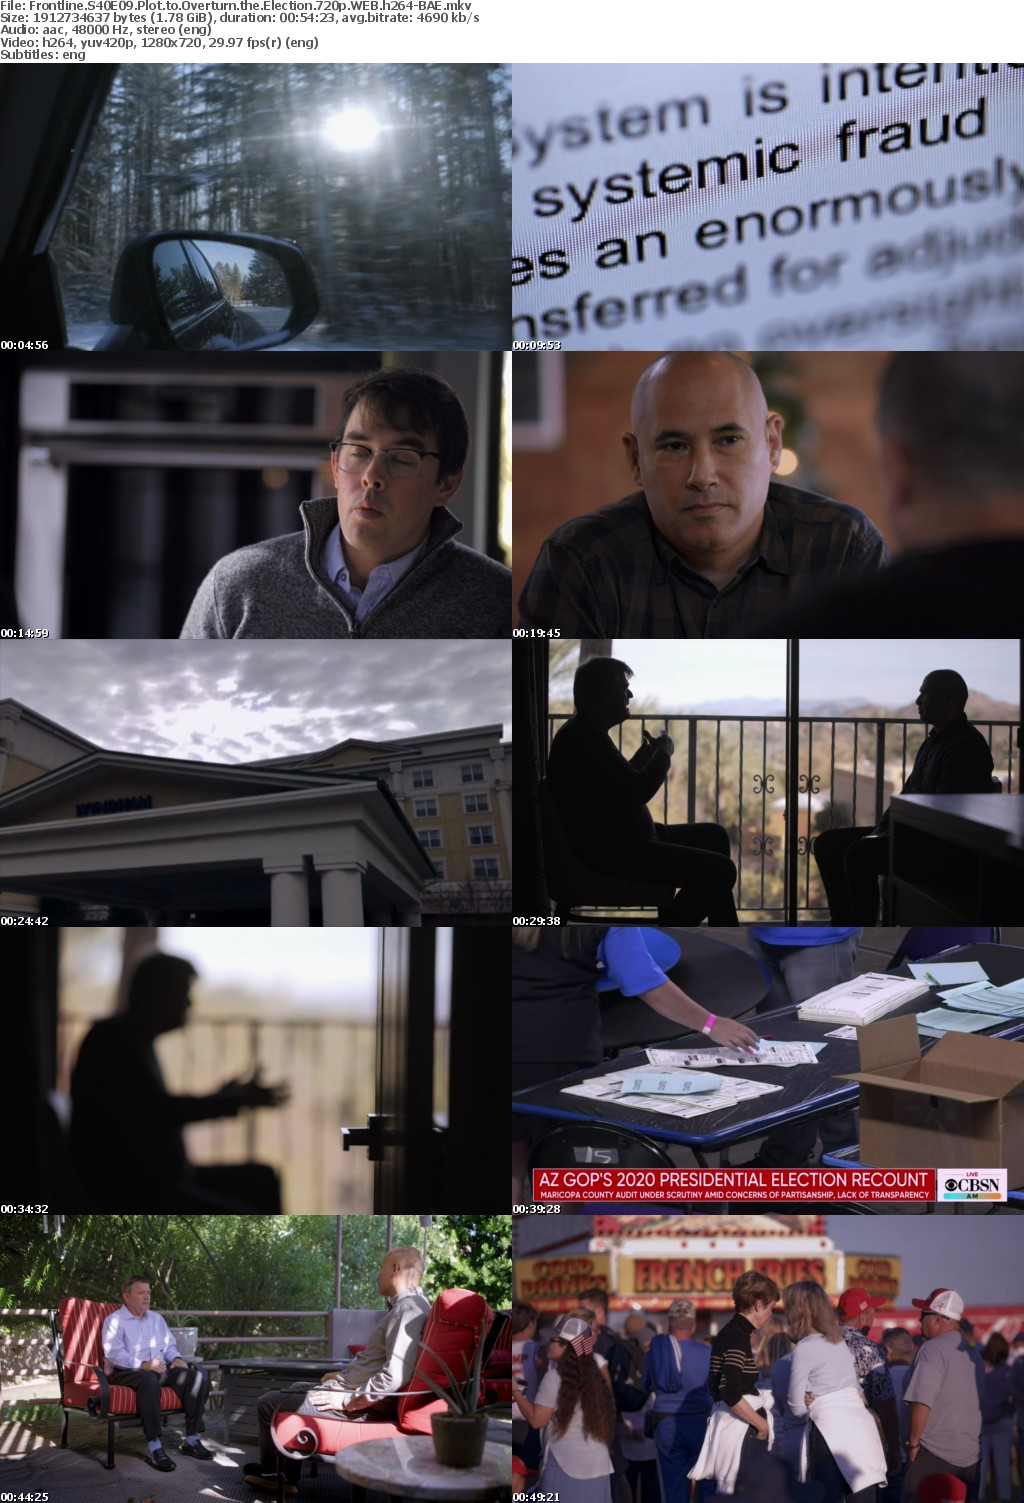 Frontline S40E09 Plot to Overturn the Election 720p WEB h264-BAE